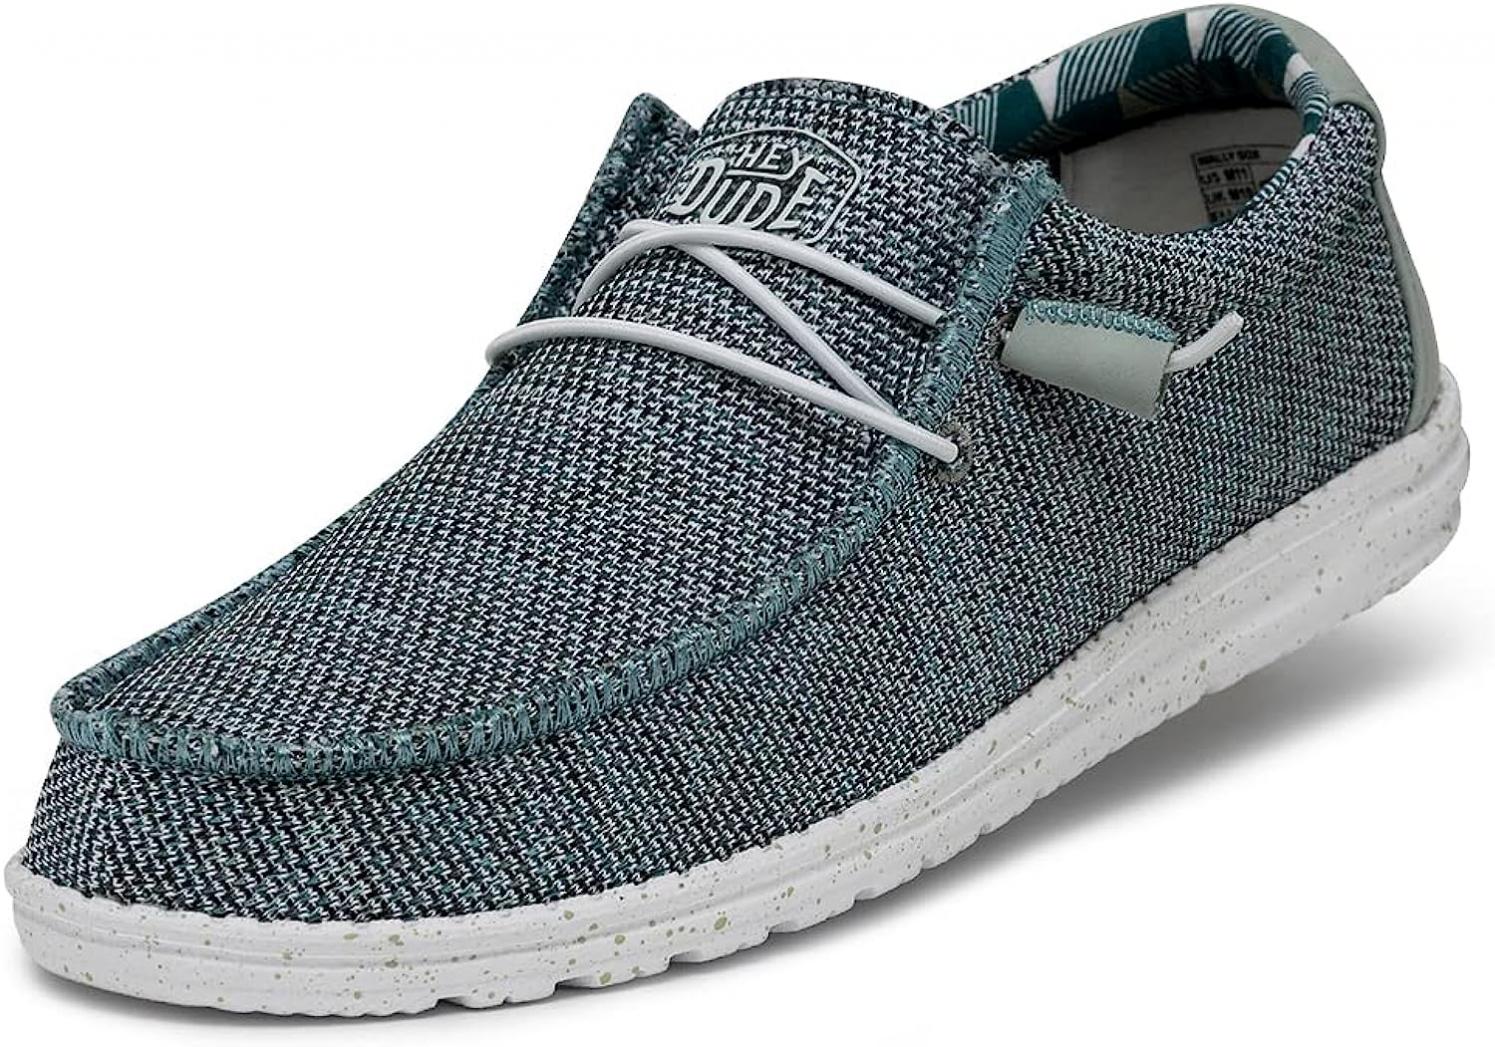 Hey Dude Men's Wally Sox Ice Grey Size 11| Men's Loafers | Men's Slip On Shoes | Comfortable & Light-Weight